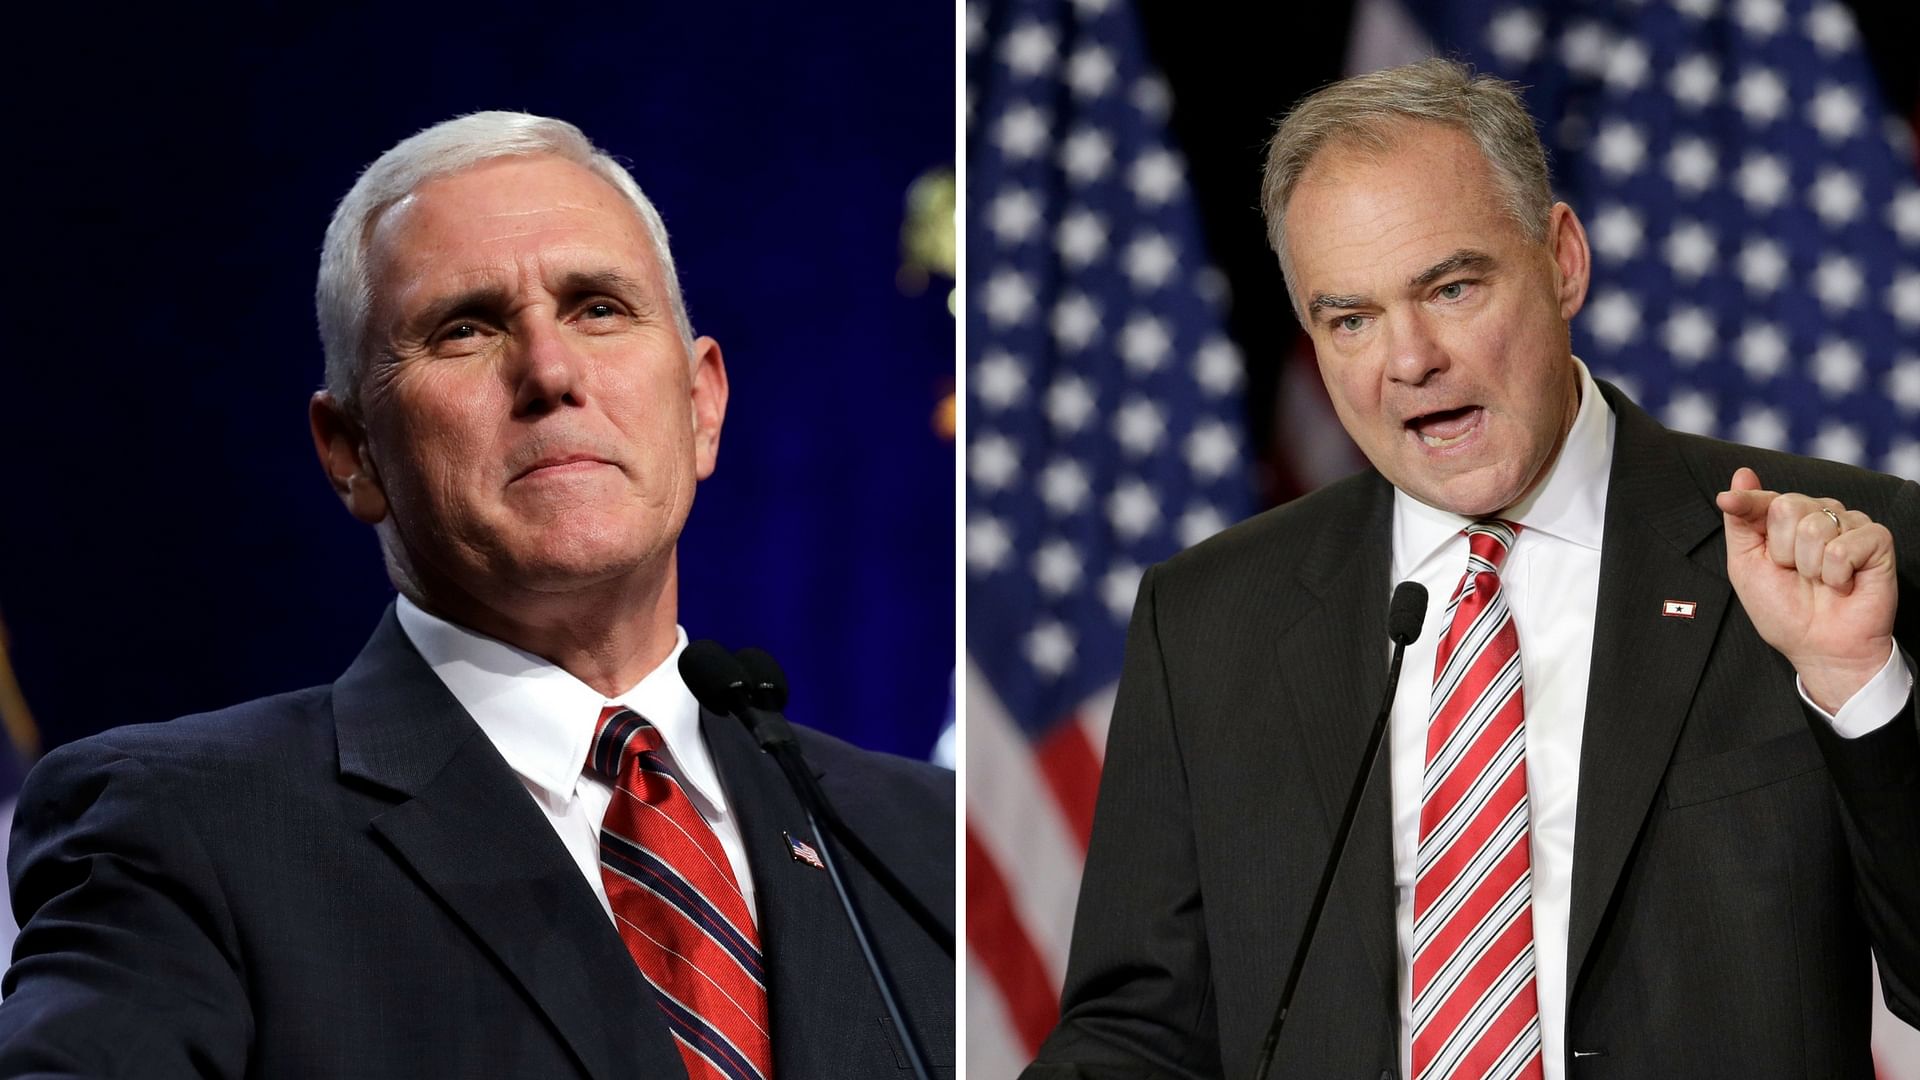 Mike Pence (left) and Tim Caine (right). (Photo: AP/ The Quint)